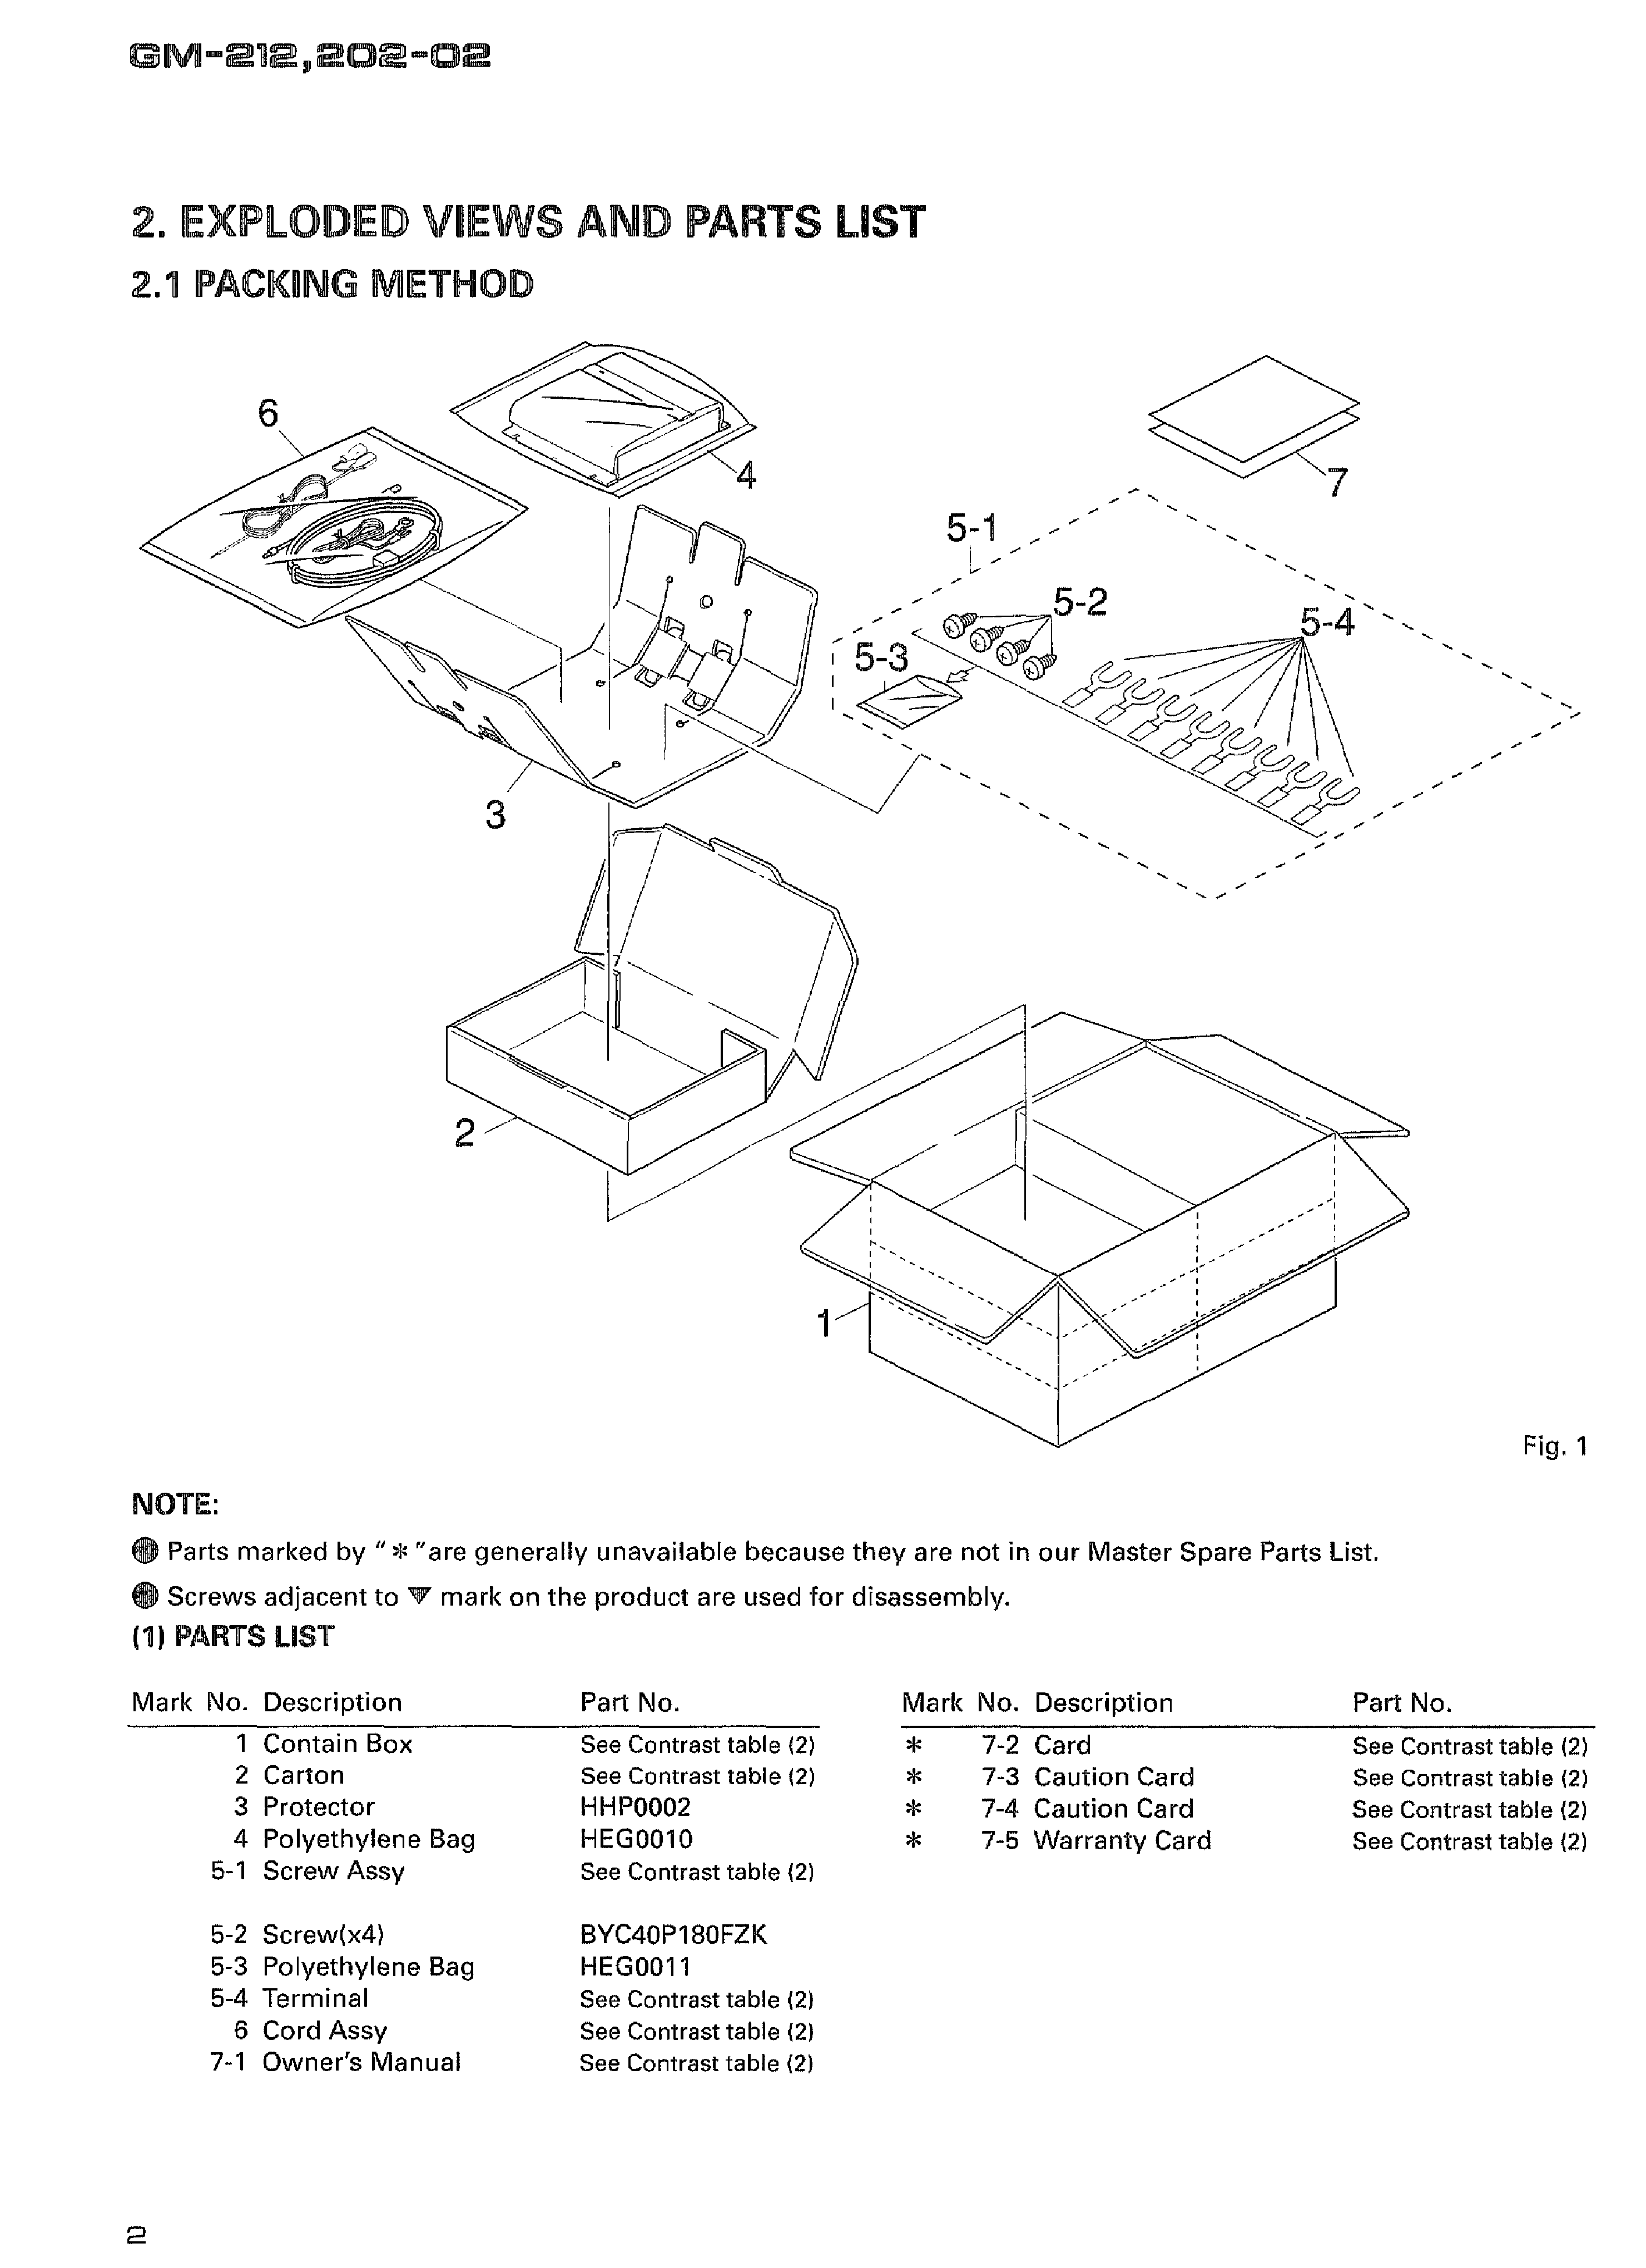 PIONEER GM-212 202-02 SM service manual (2nd page)